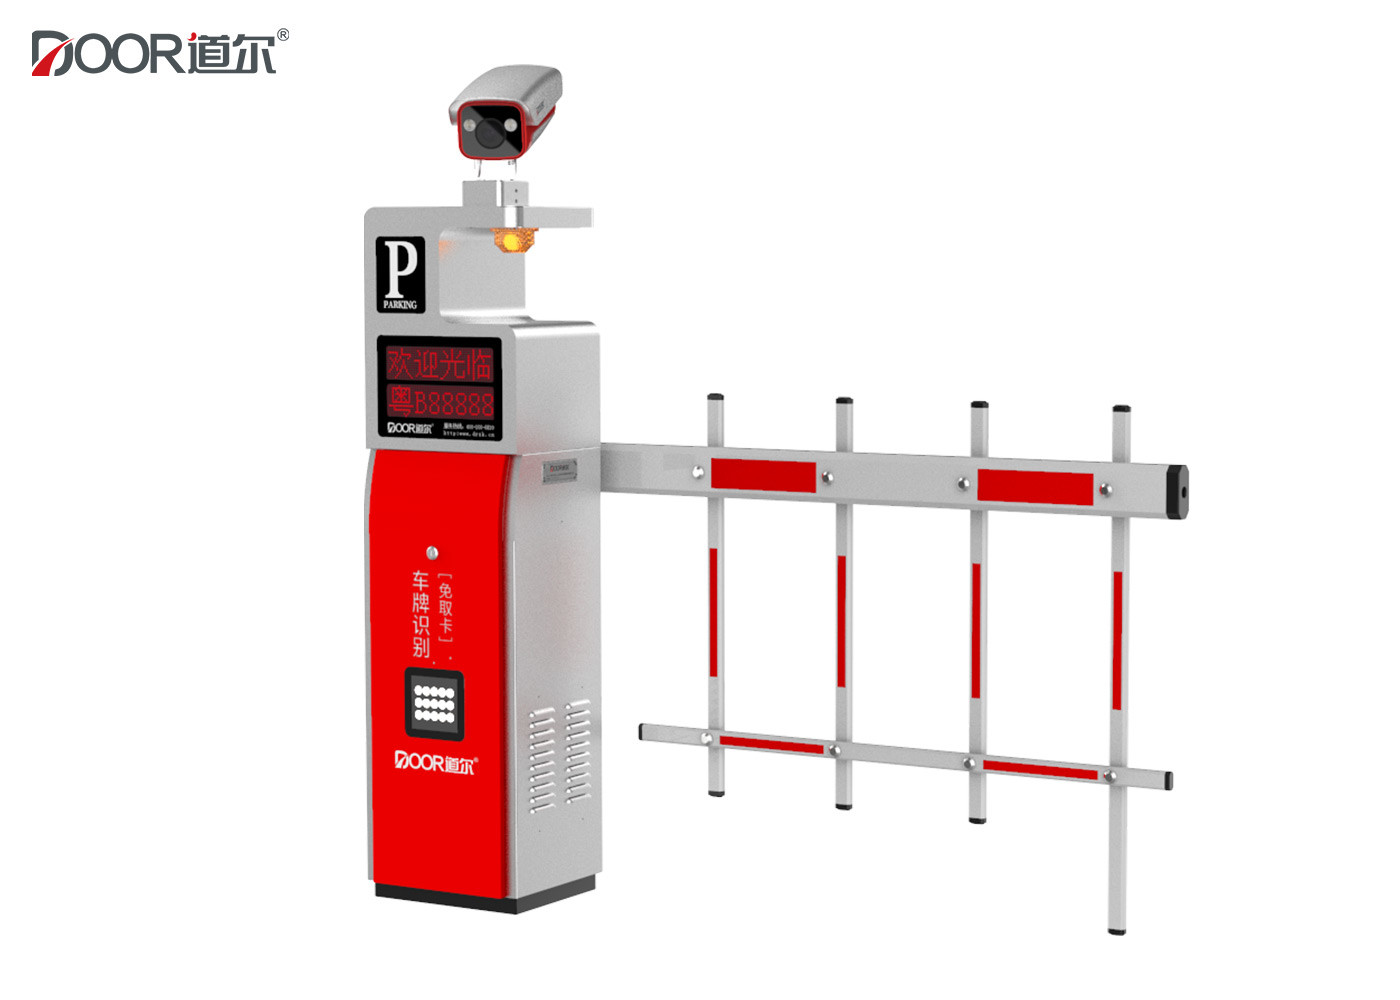 120w Vehicle LPR Parking System With Fence Barrier Super Easy To Install